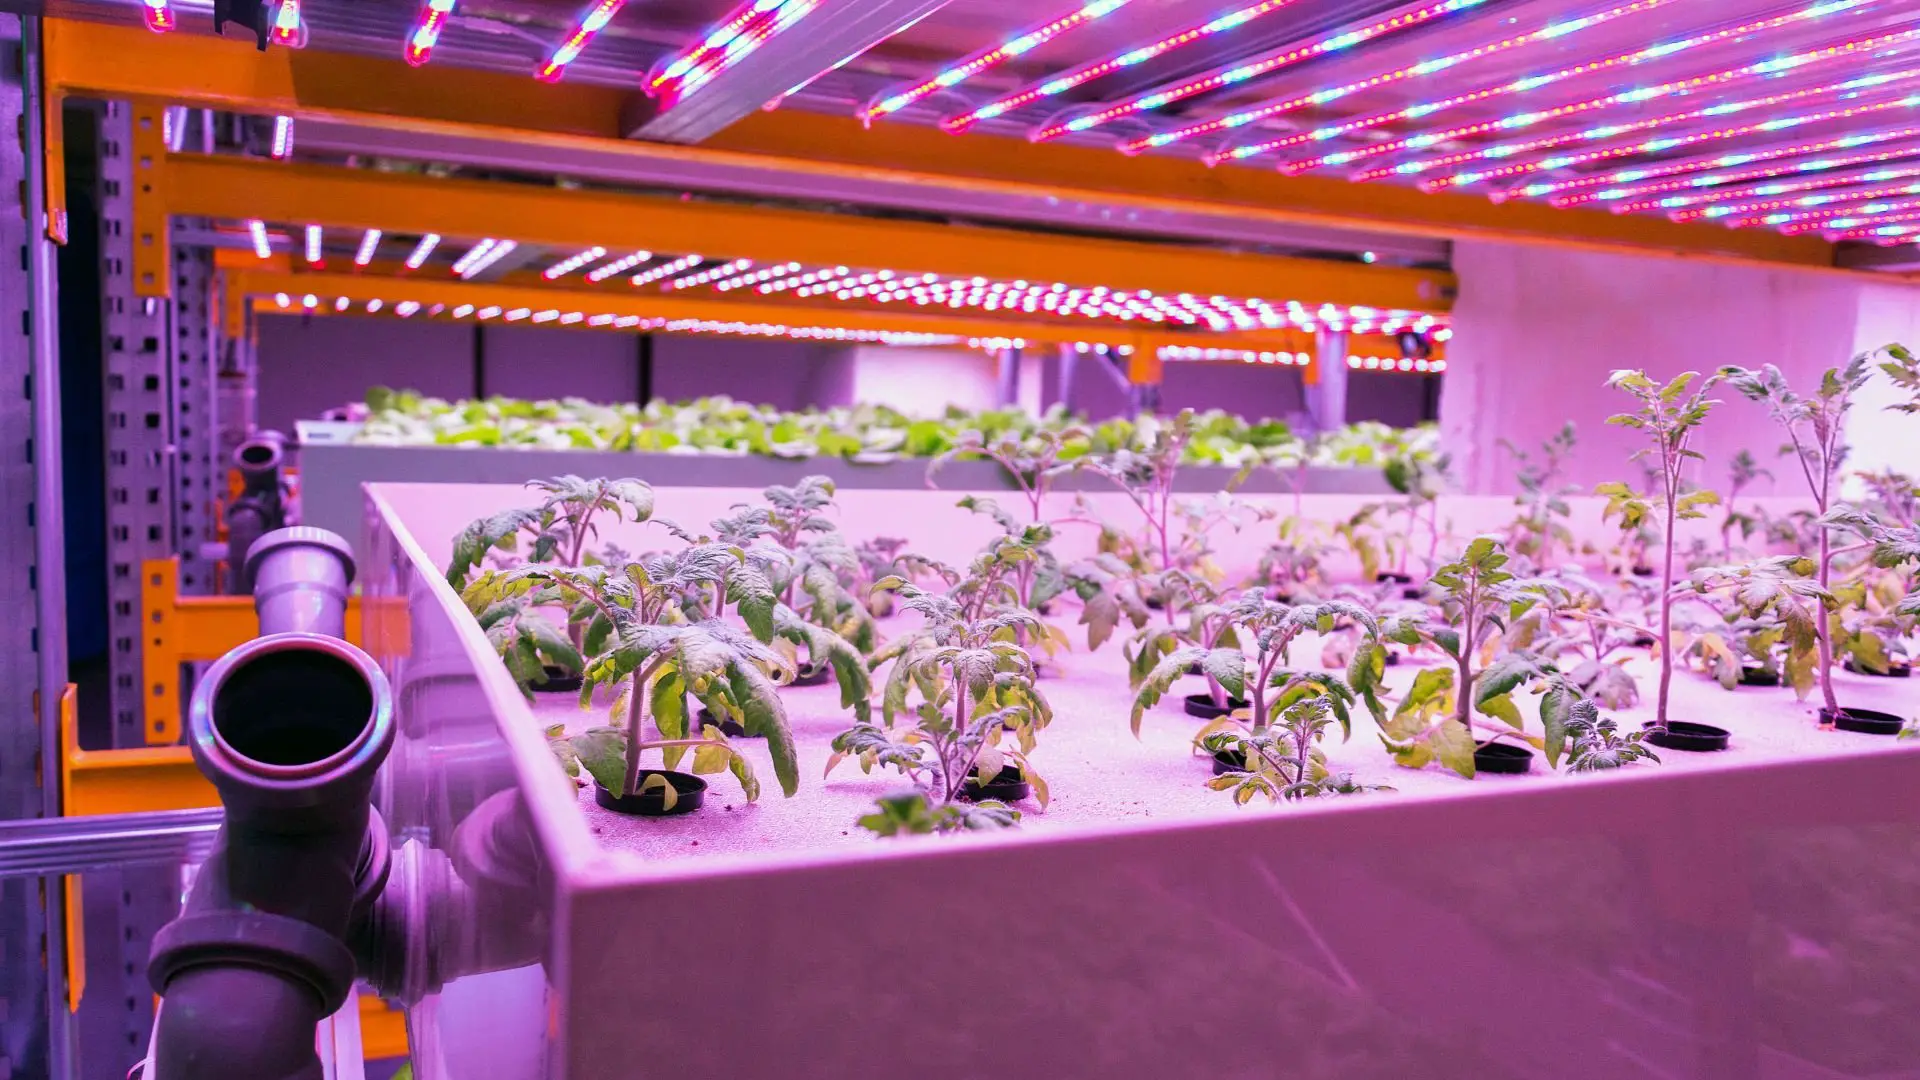 % Learn how hydroponic farming can help coastal areas become more sustainable and support the global population growth, as well as reduce exposure to climate and non-climate coastal hazards